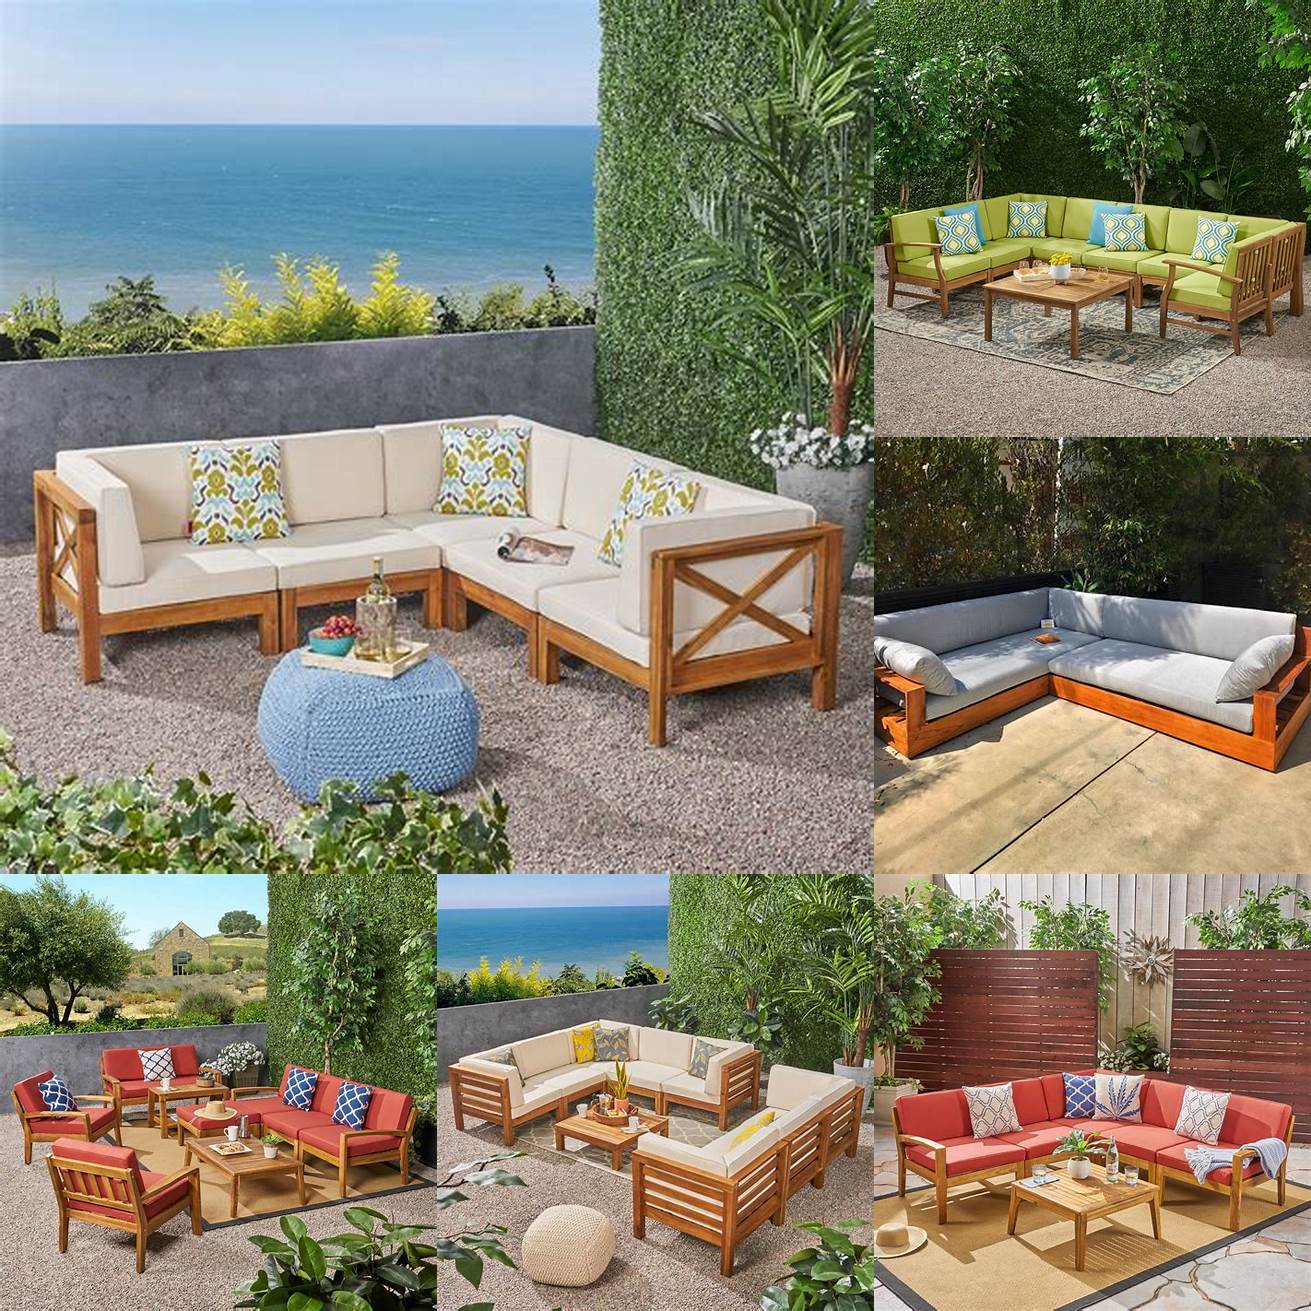 Teak Outdoor Furniture Huge Sectional with Cushions and Pillows